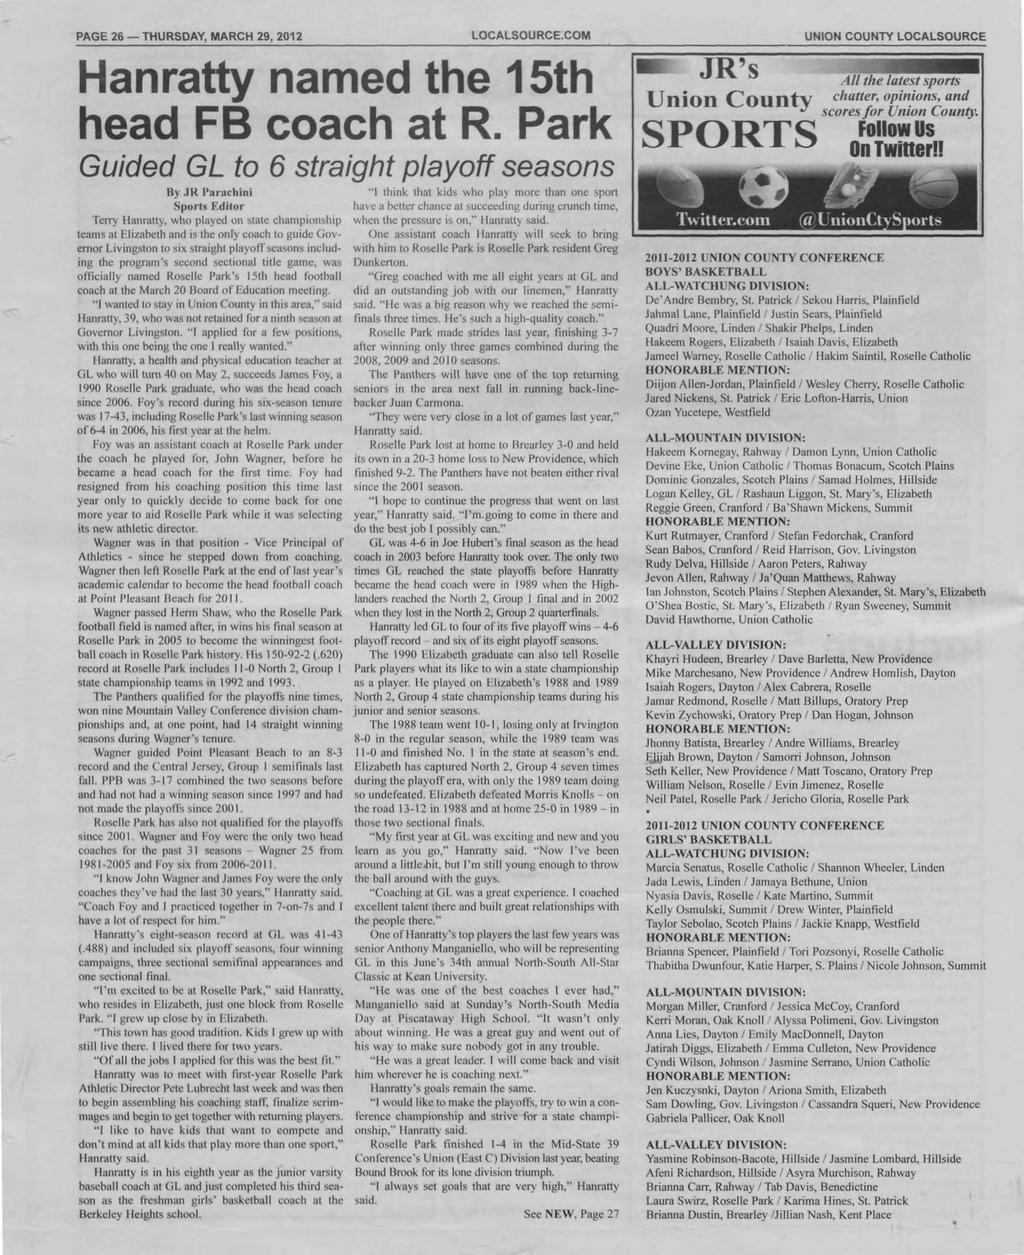 PAGE 26 THURSDAY, MARCH 29, 2012 LOCALSOURCE.COM COUNTY LOCALSOURCE \R\ tjxv a Hanratty named the 15th head FB coach at R.